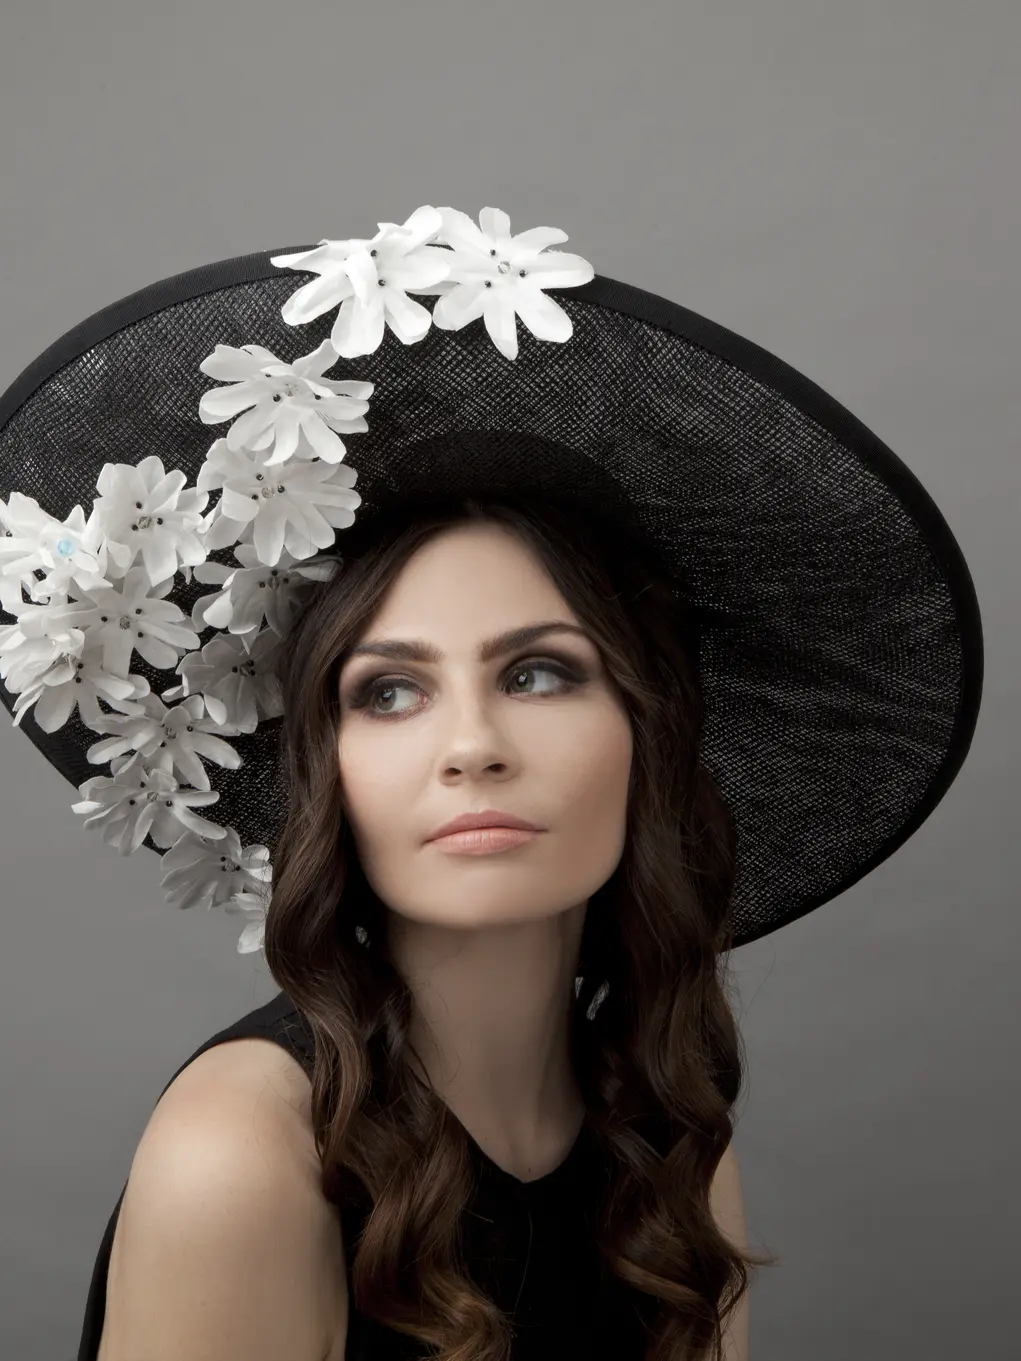 A woman in a black hat covered with white flowers